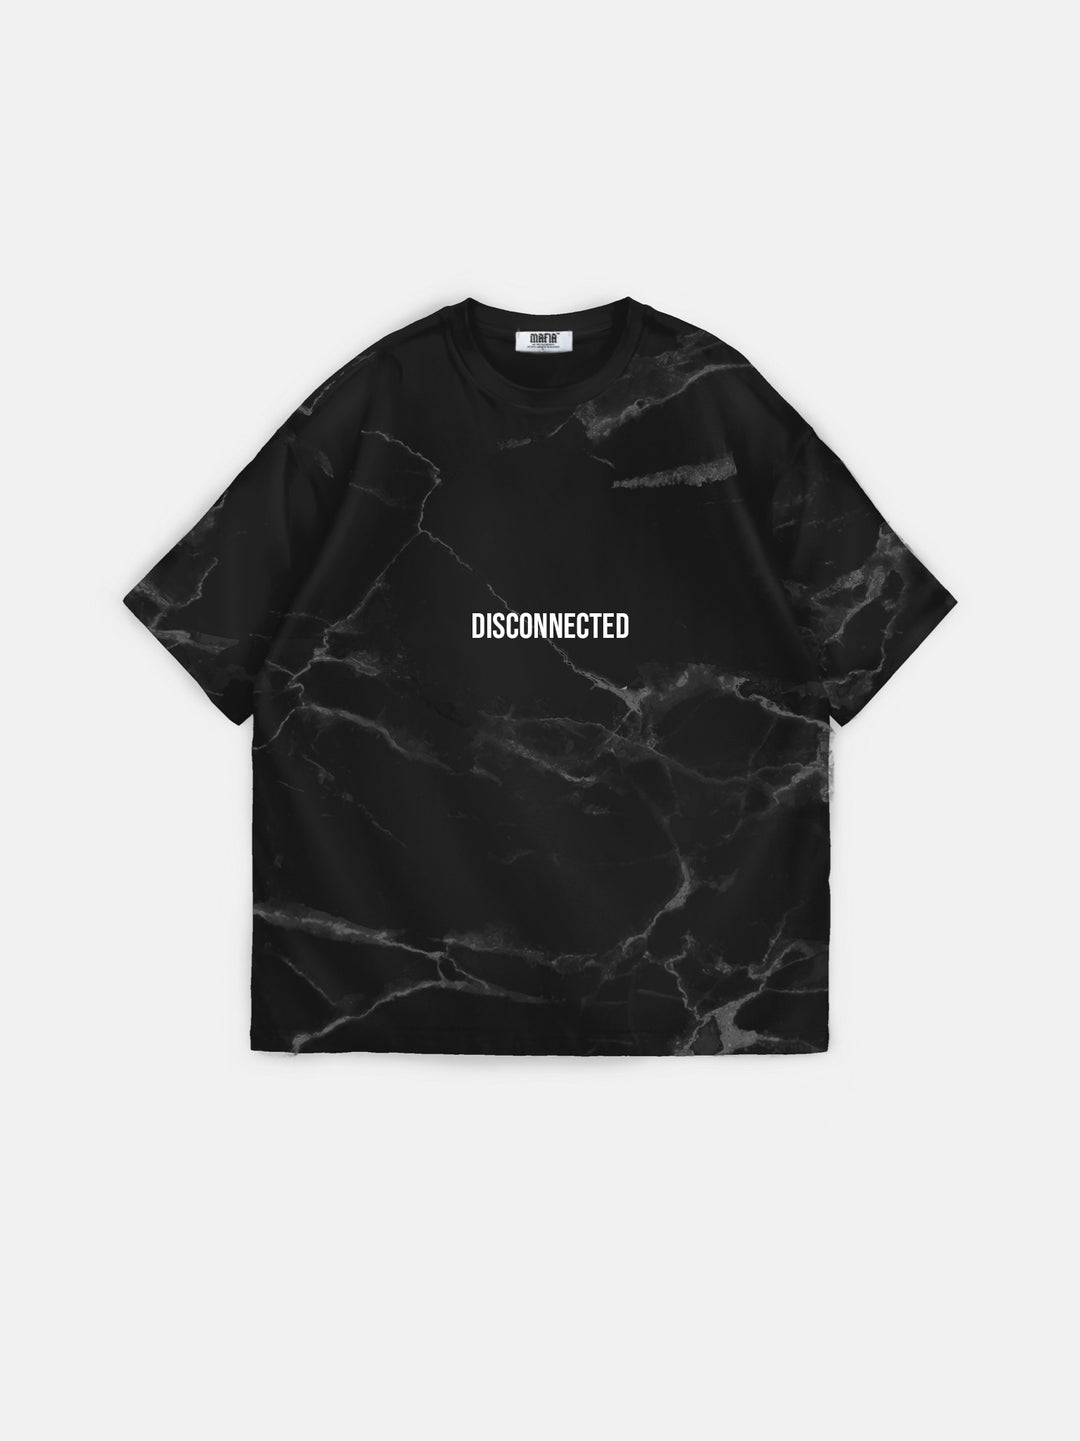 Oversize Disconnected T-shirt - Black and Grey